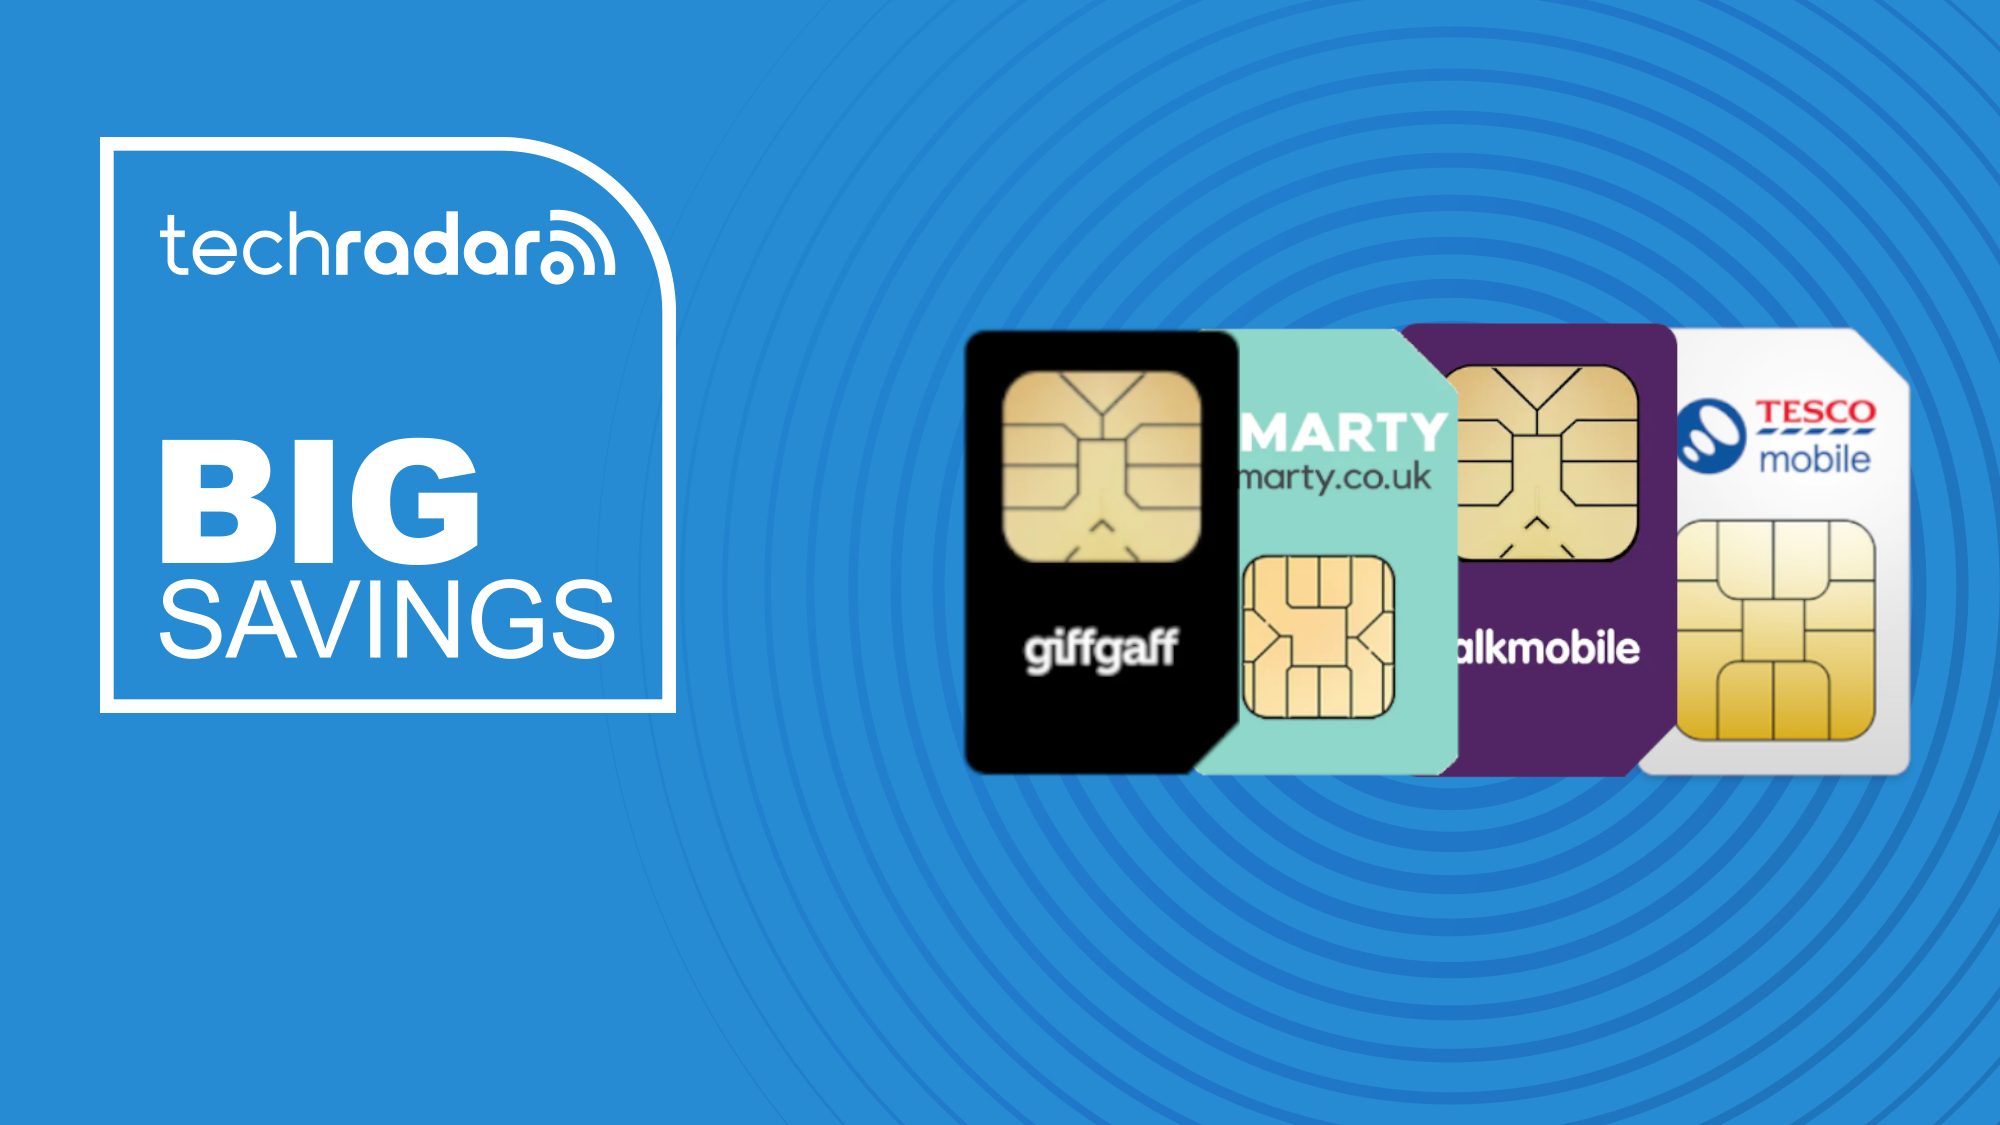 Listen to Martin Lewis - these SIM-only deals are no more than £10 and come packed full of data